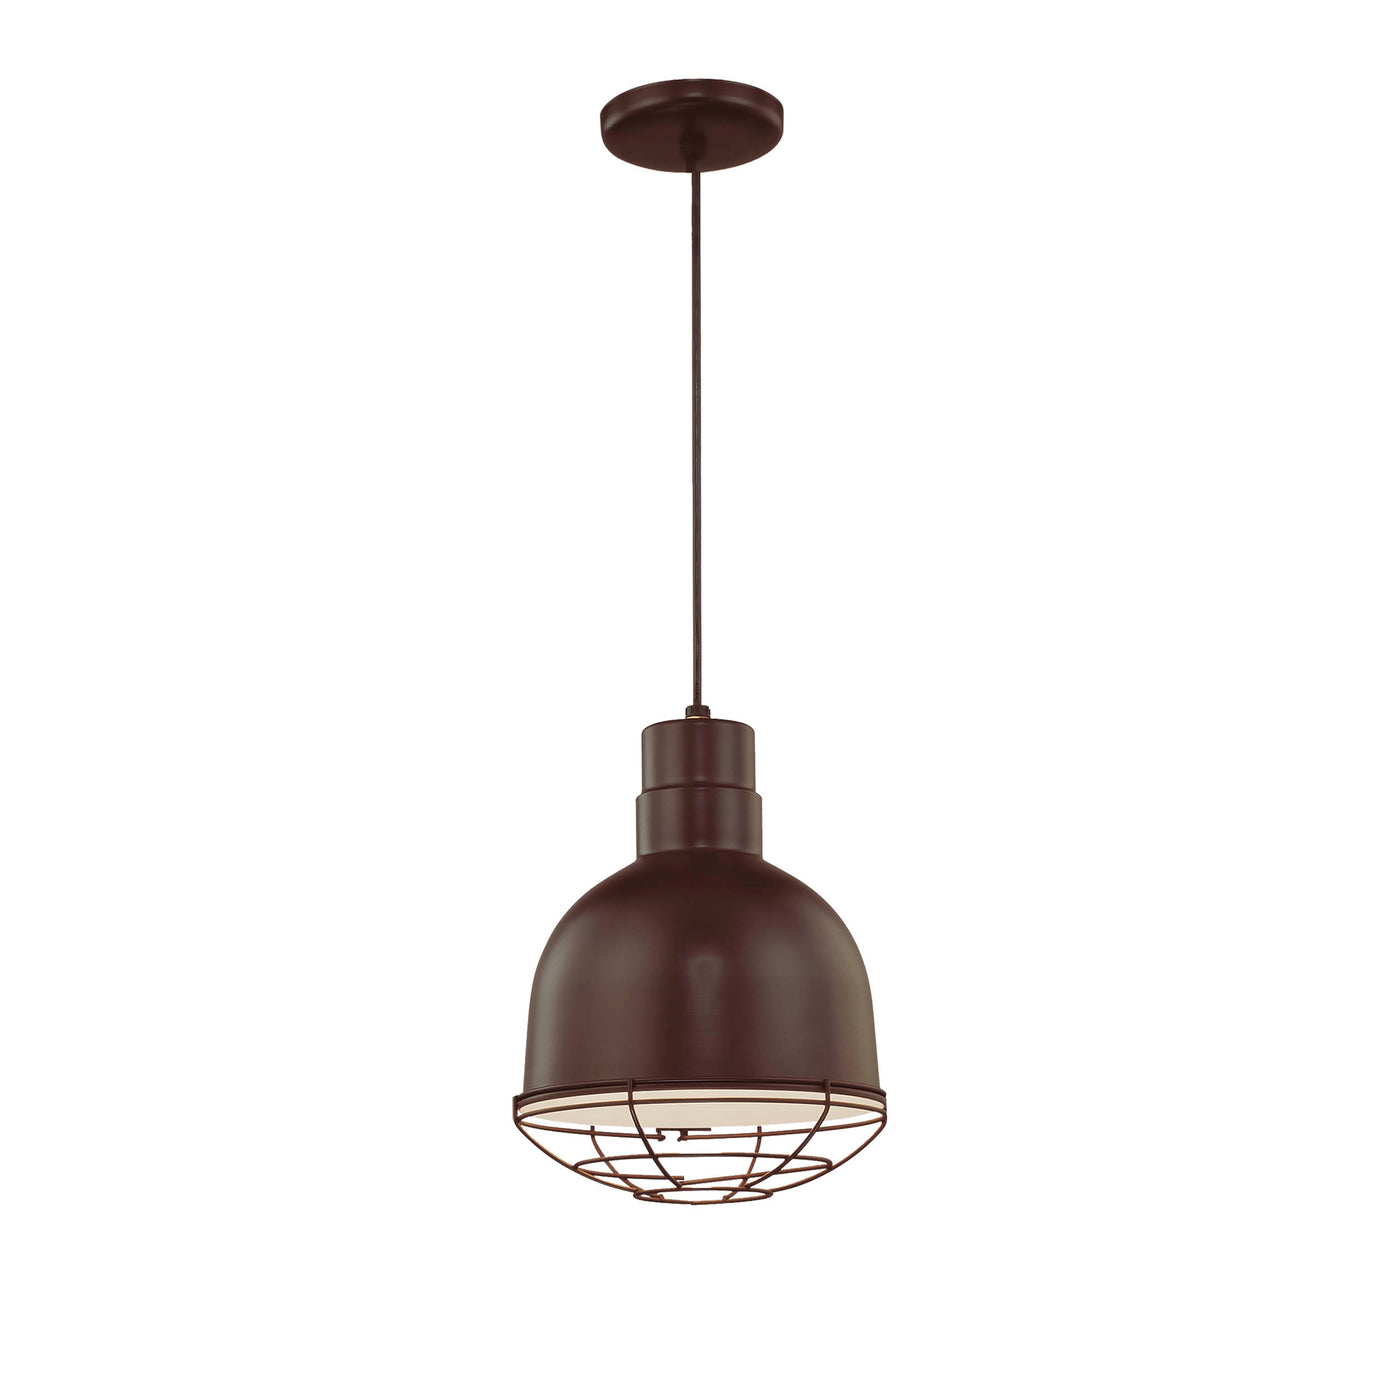 Millennium Lighting Rosemont 10" RLM/ Cord Hung Deep Bowl Shade (Available in Bronze, Galvanized, Black, Red, and Green Finishes)